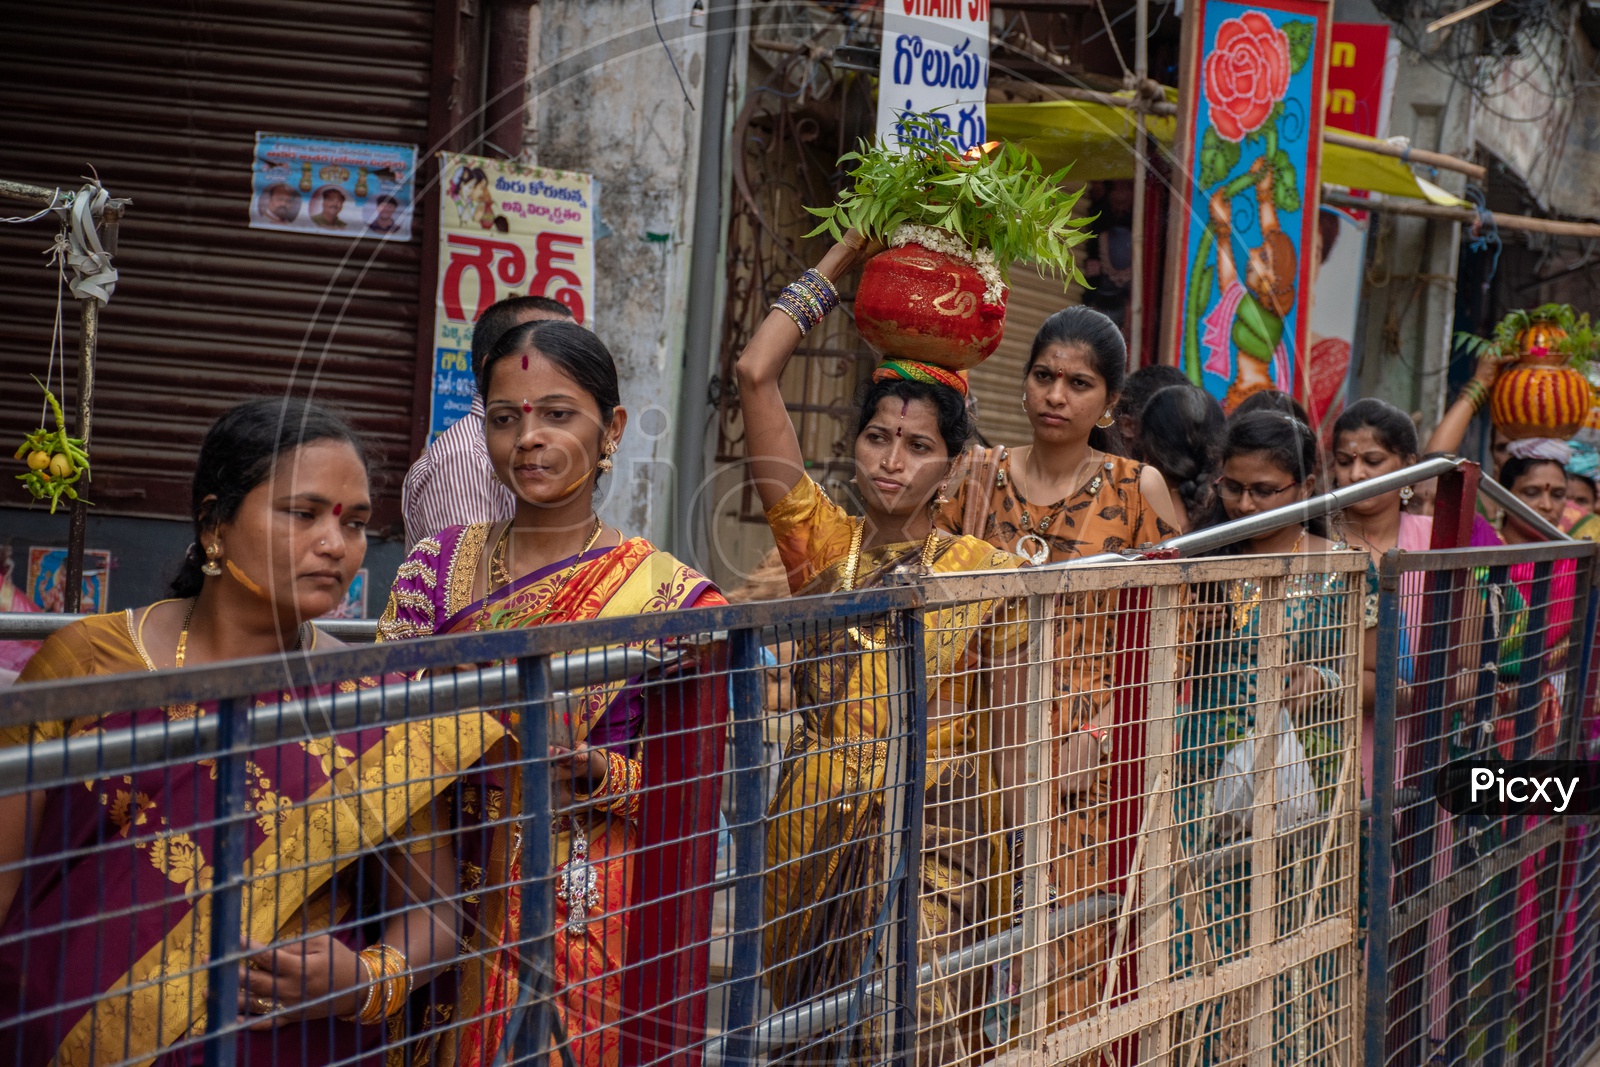 Women waiting in queue to offer bonalu at Mahankali Temple, secunderabad on the eve of bonalu festival.